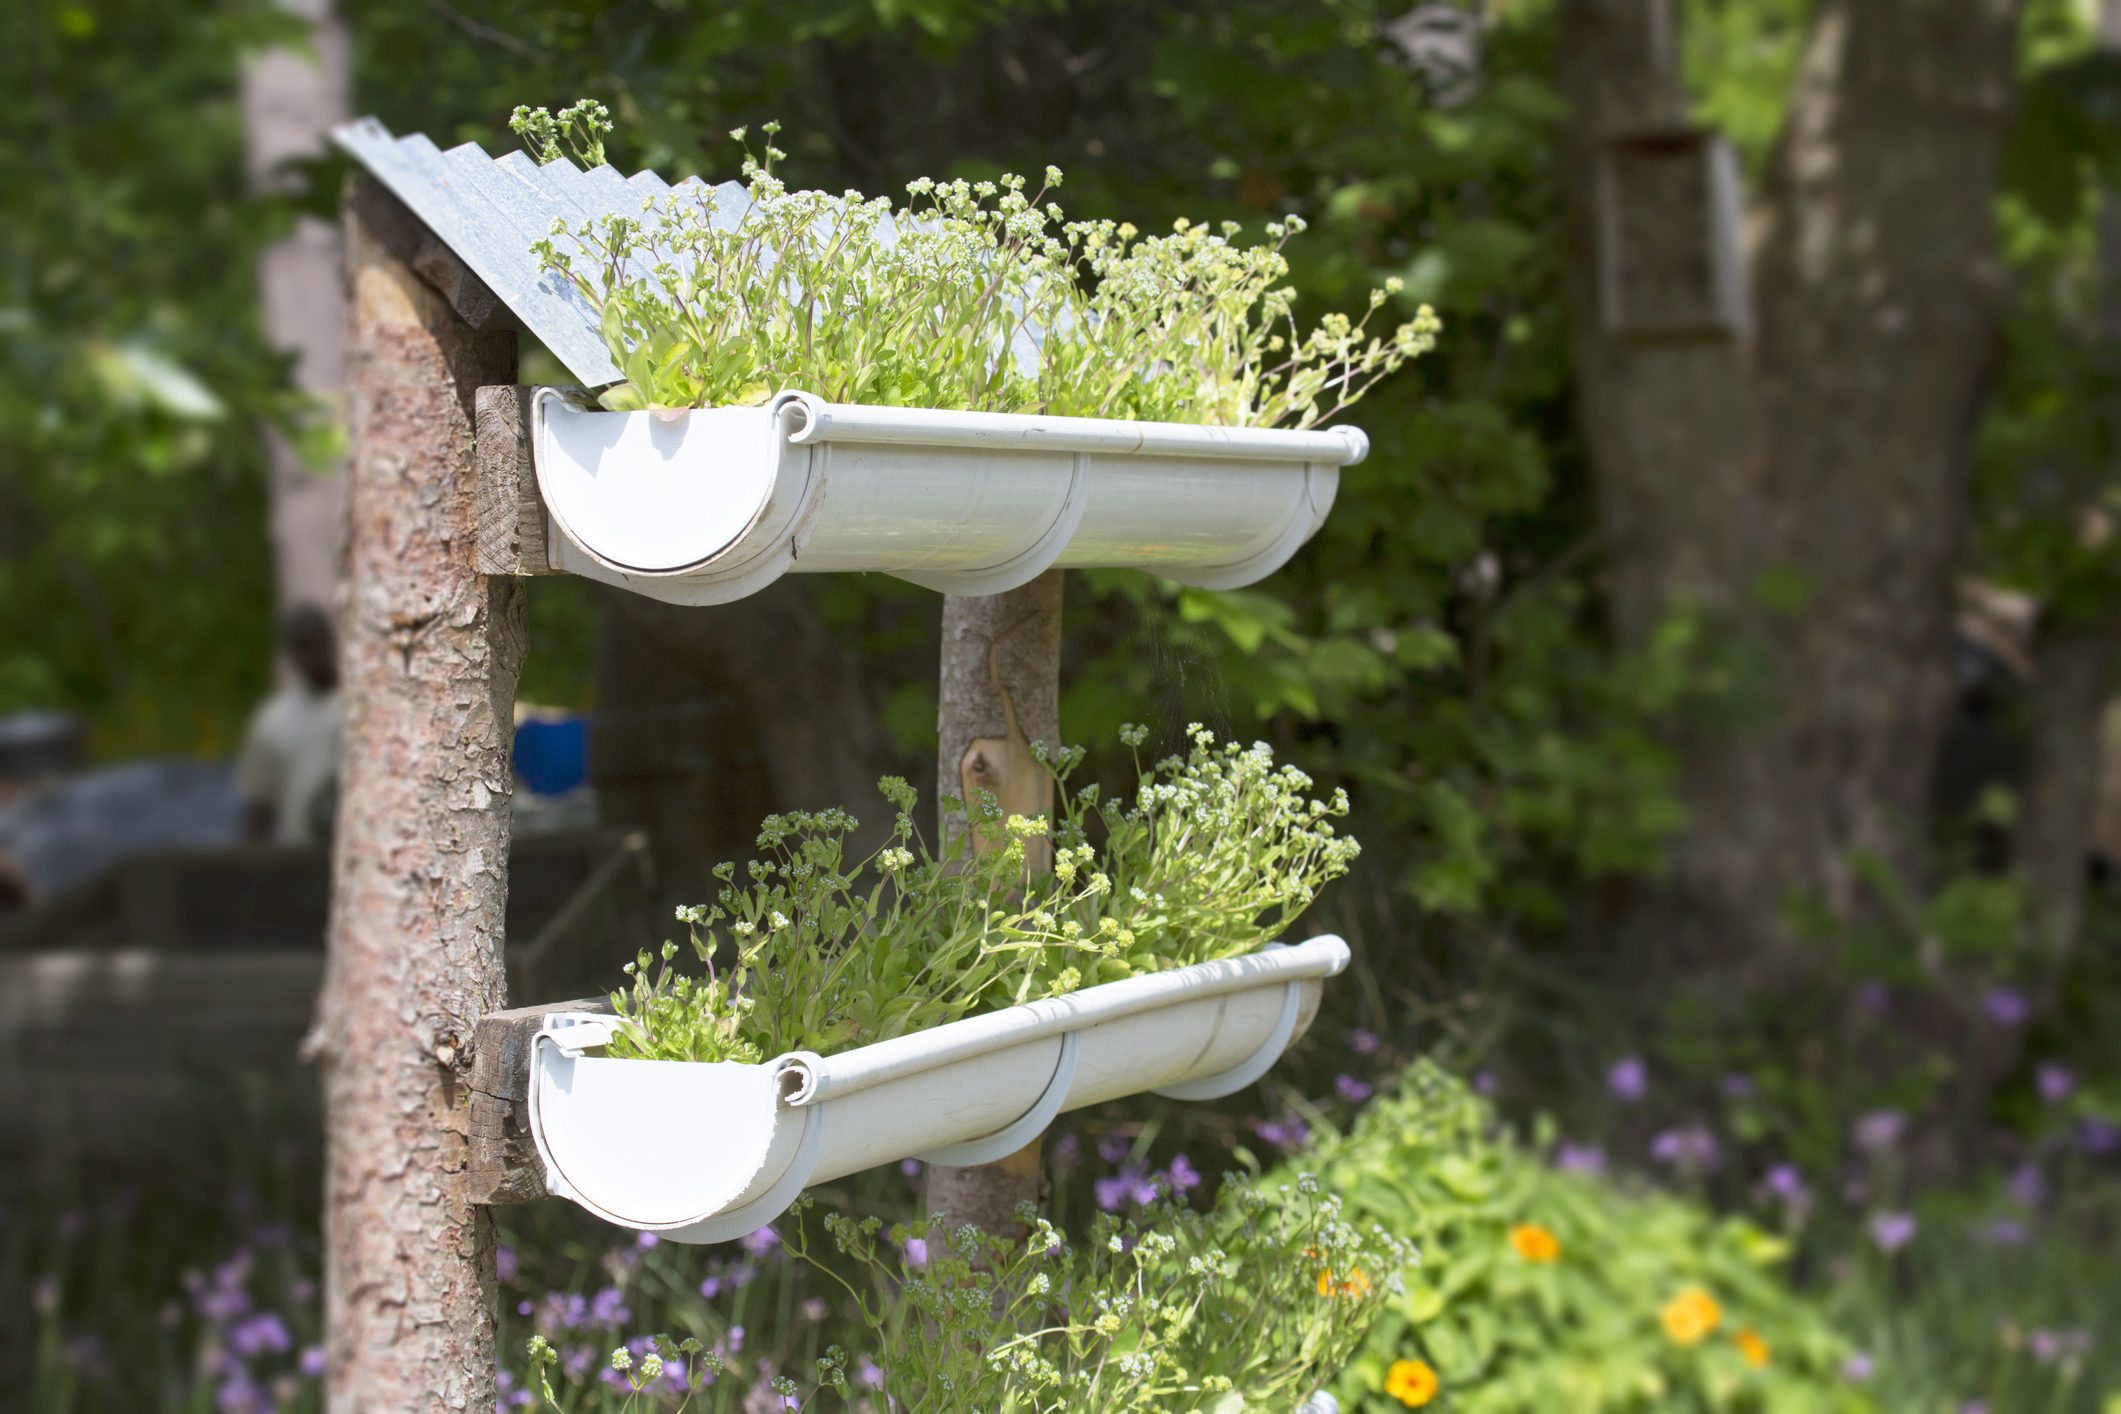 Designing a Downspout Garden That Fits Your Style